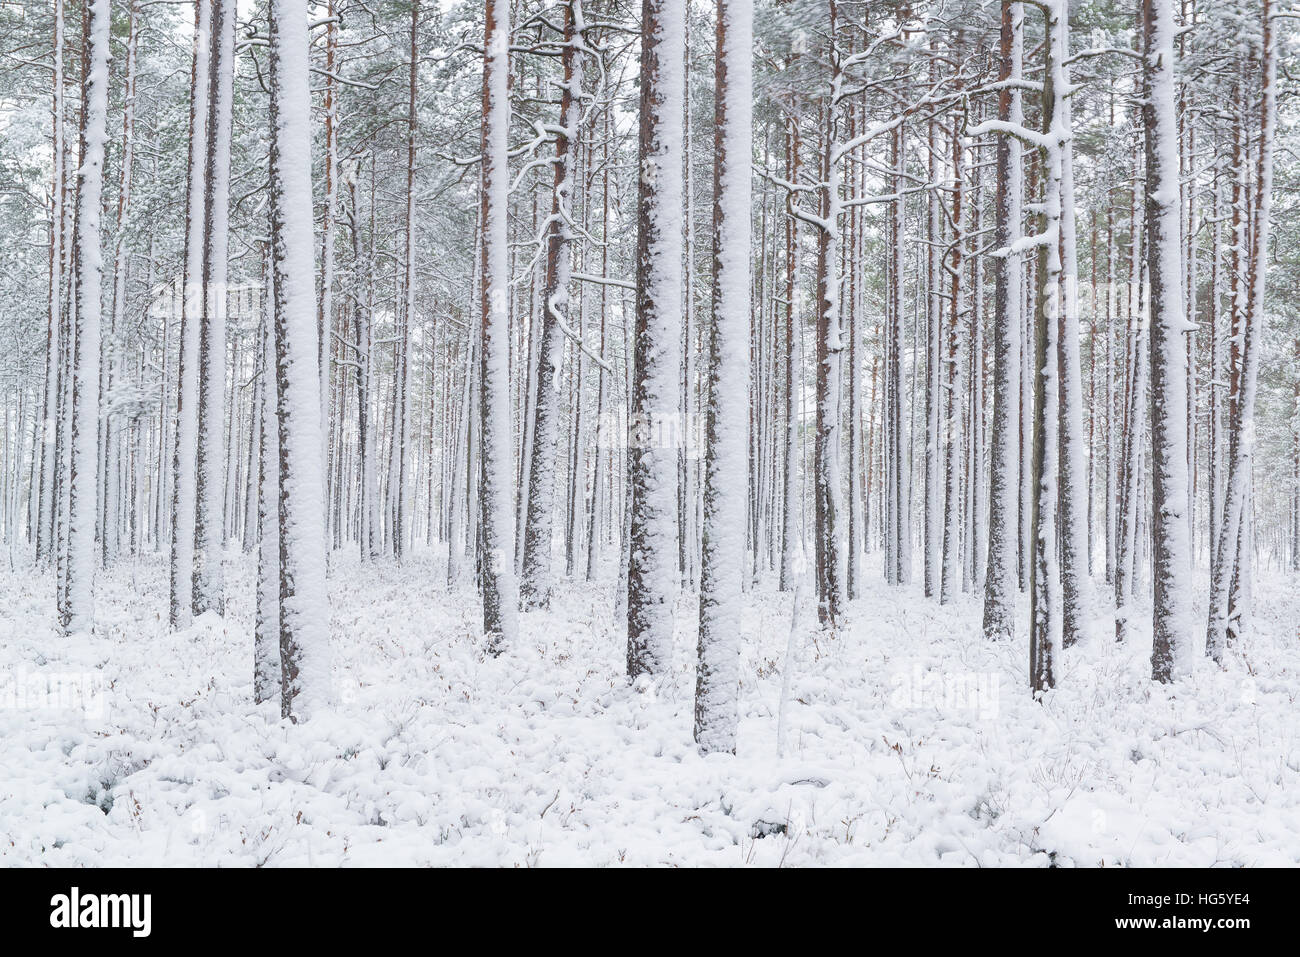 Snowy pine forest after the blizzard Stock Photo